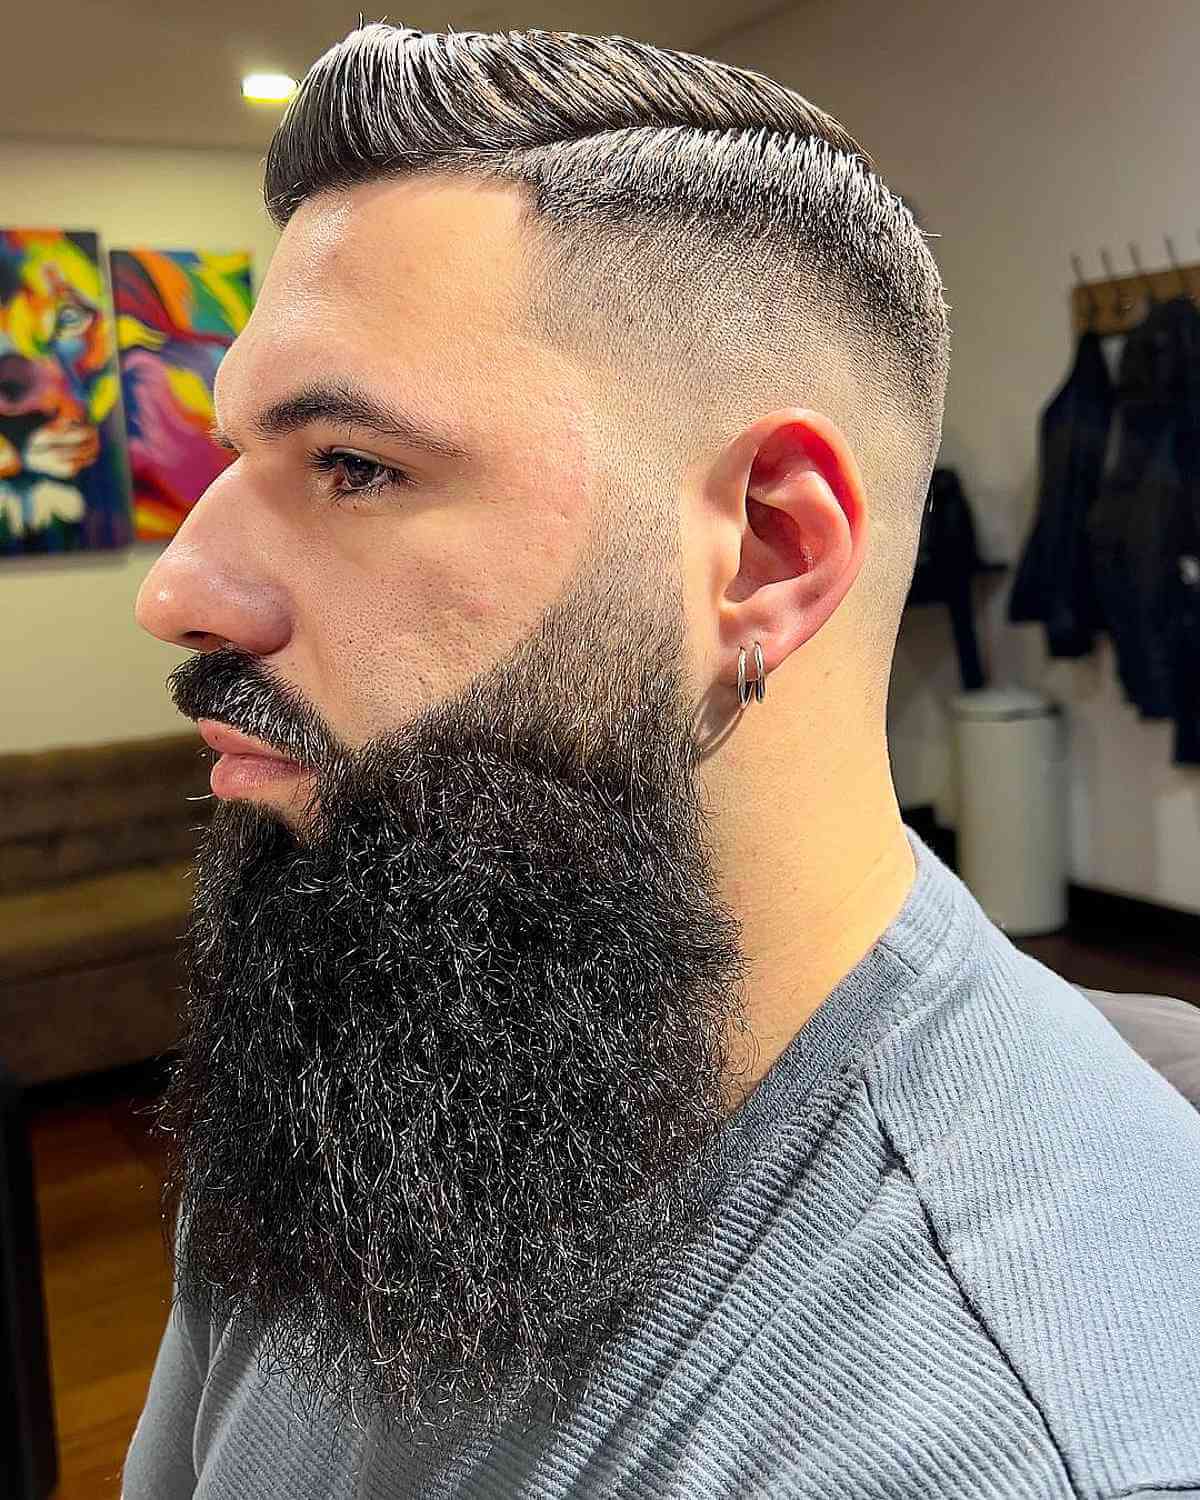 Stylish High Fade with a Beard and Mustache